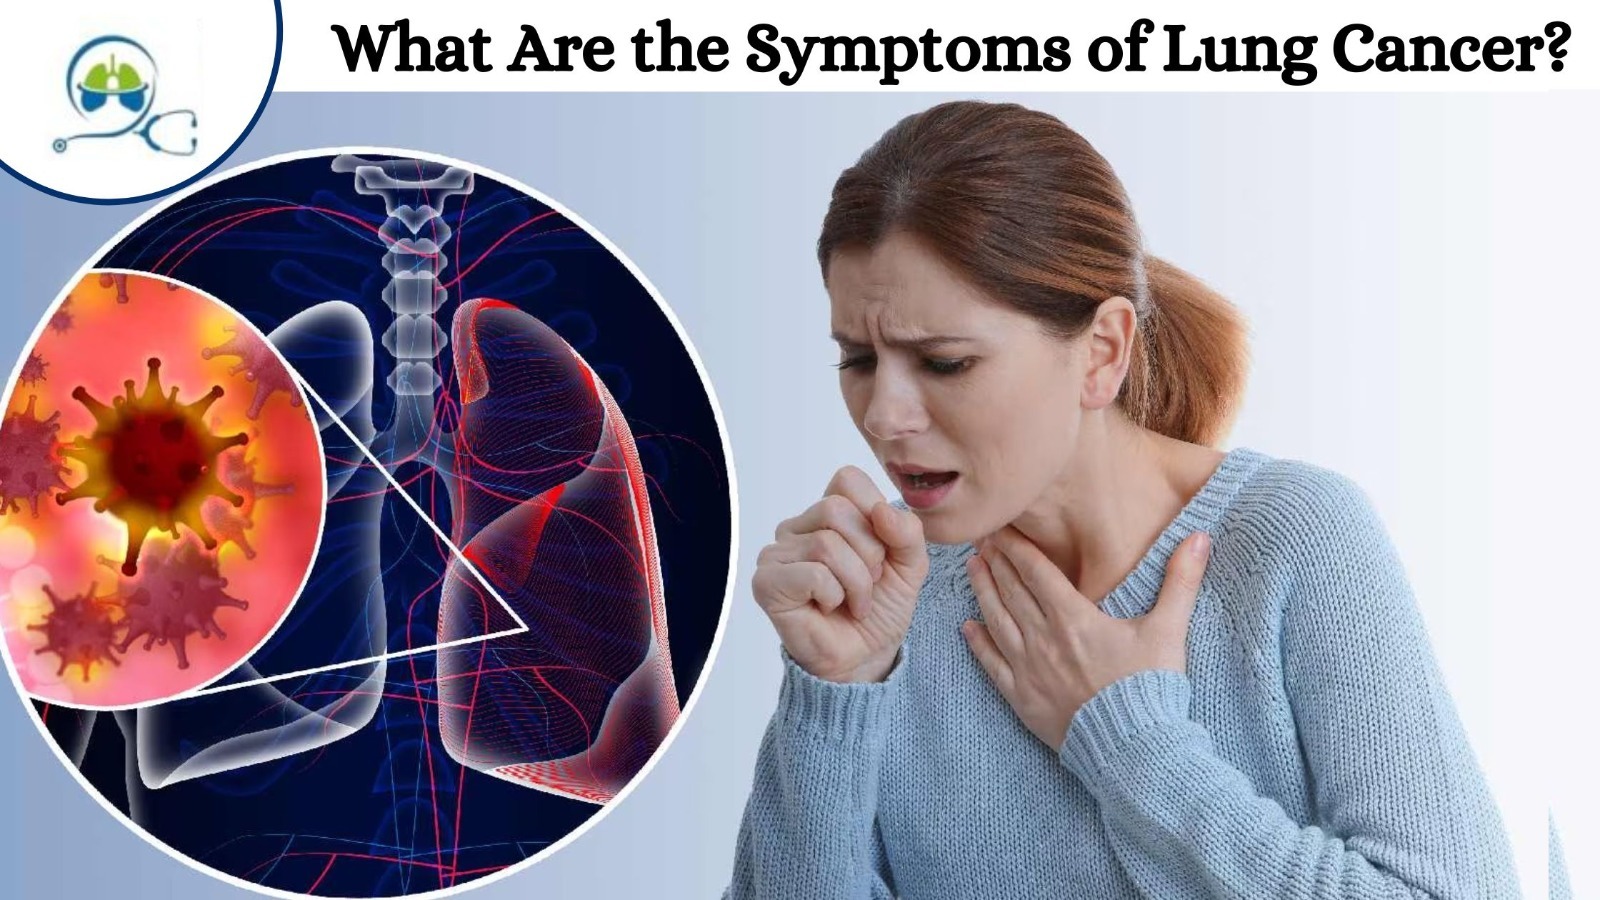 What Are the Symptoms of Lung Cancer-Dr. Harish Verma